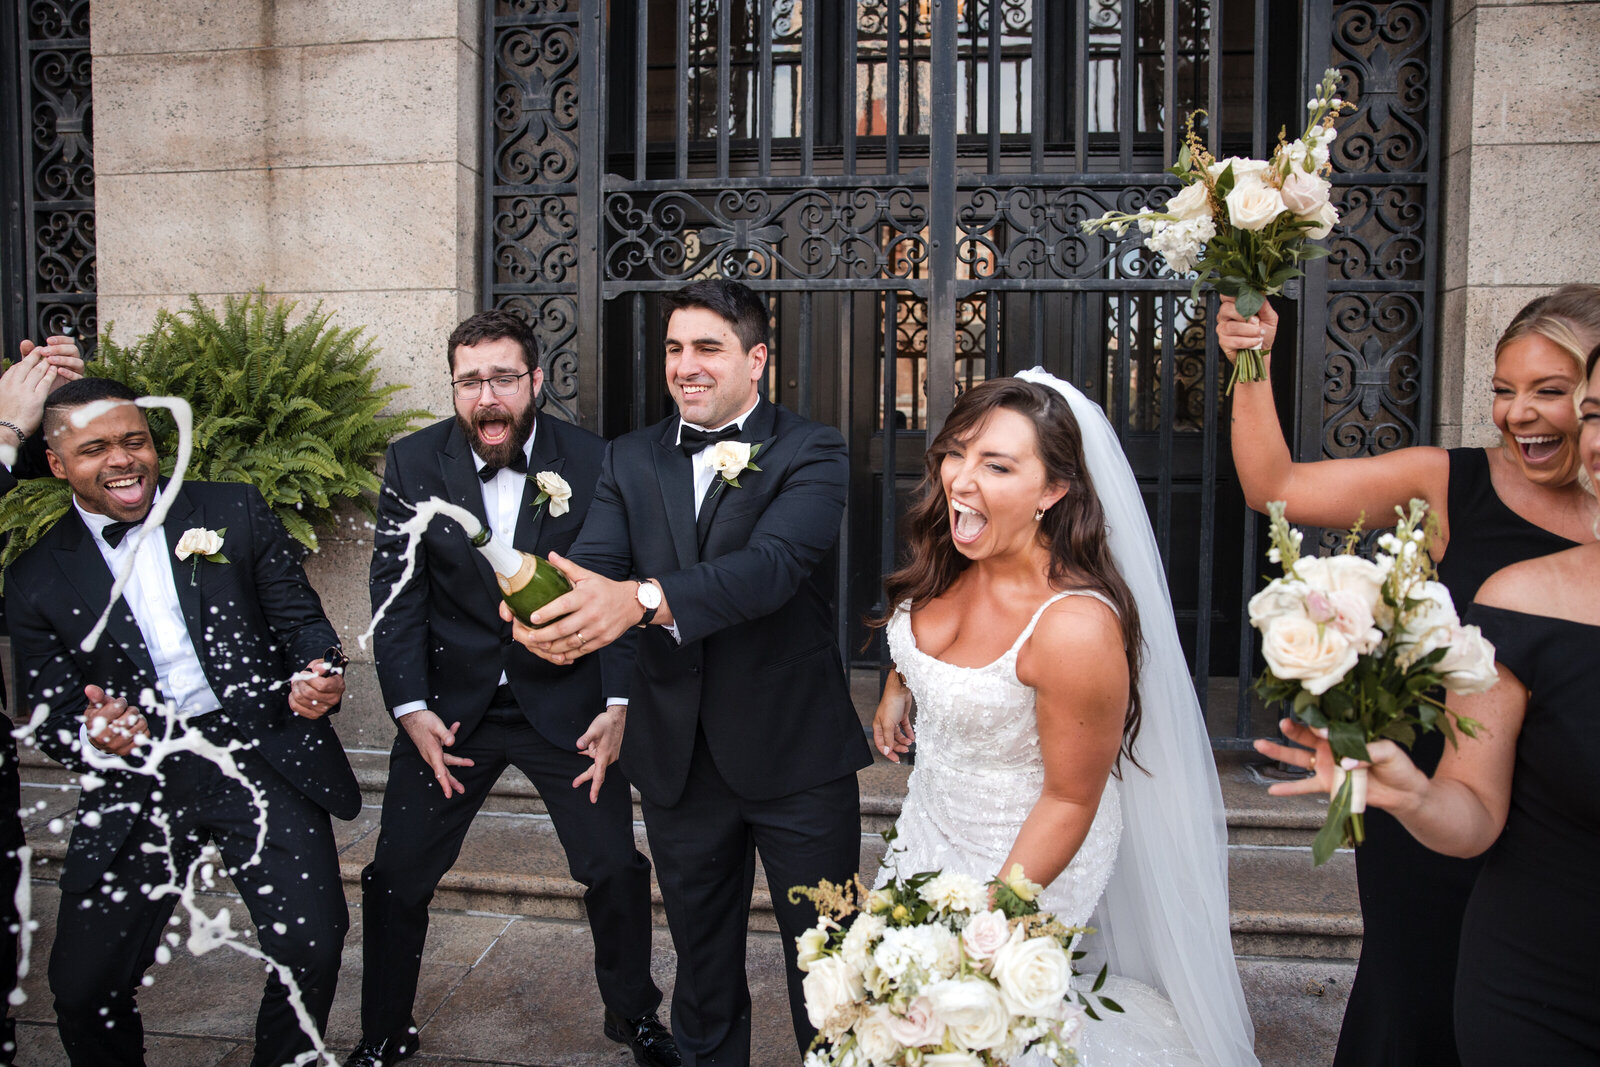 bridal party sprays champagne at boston public library